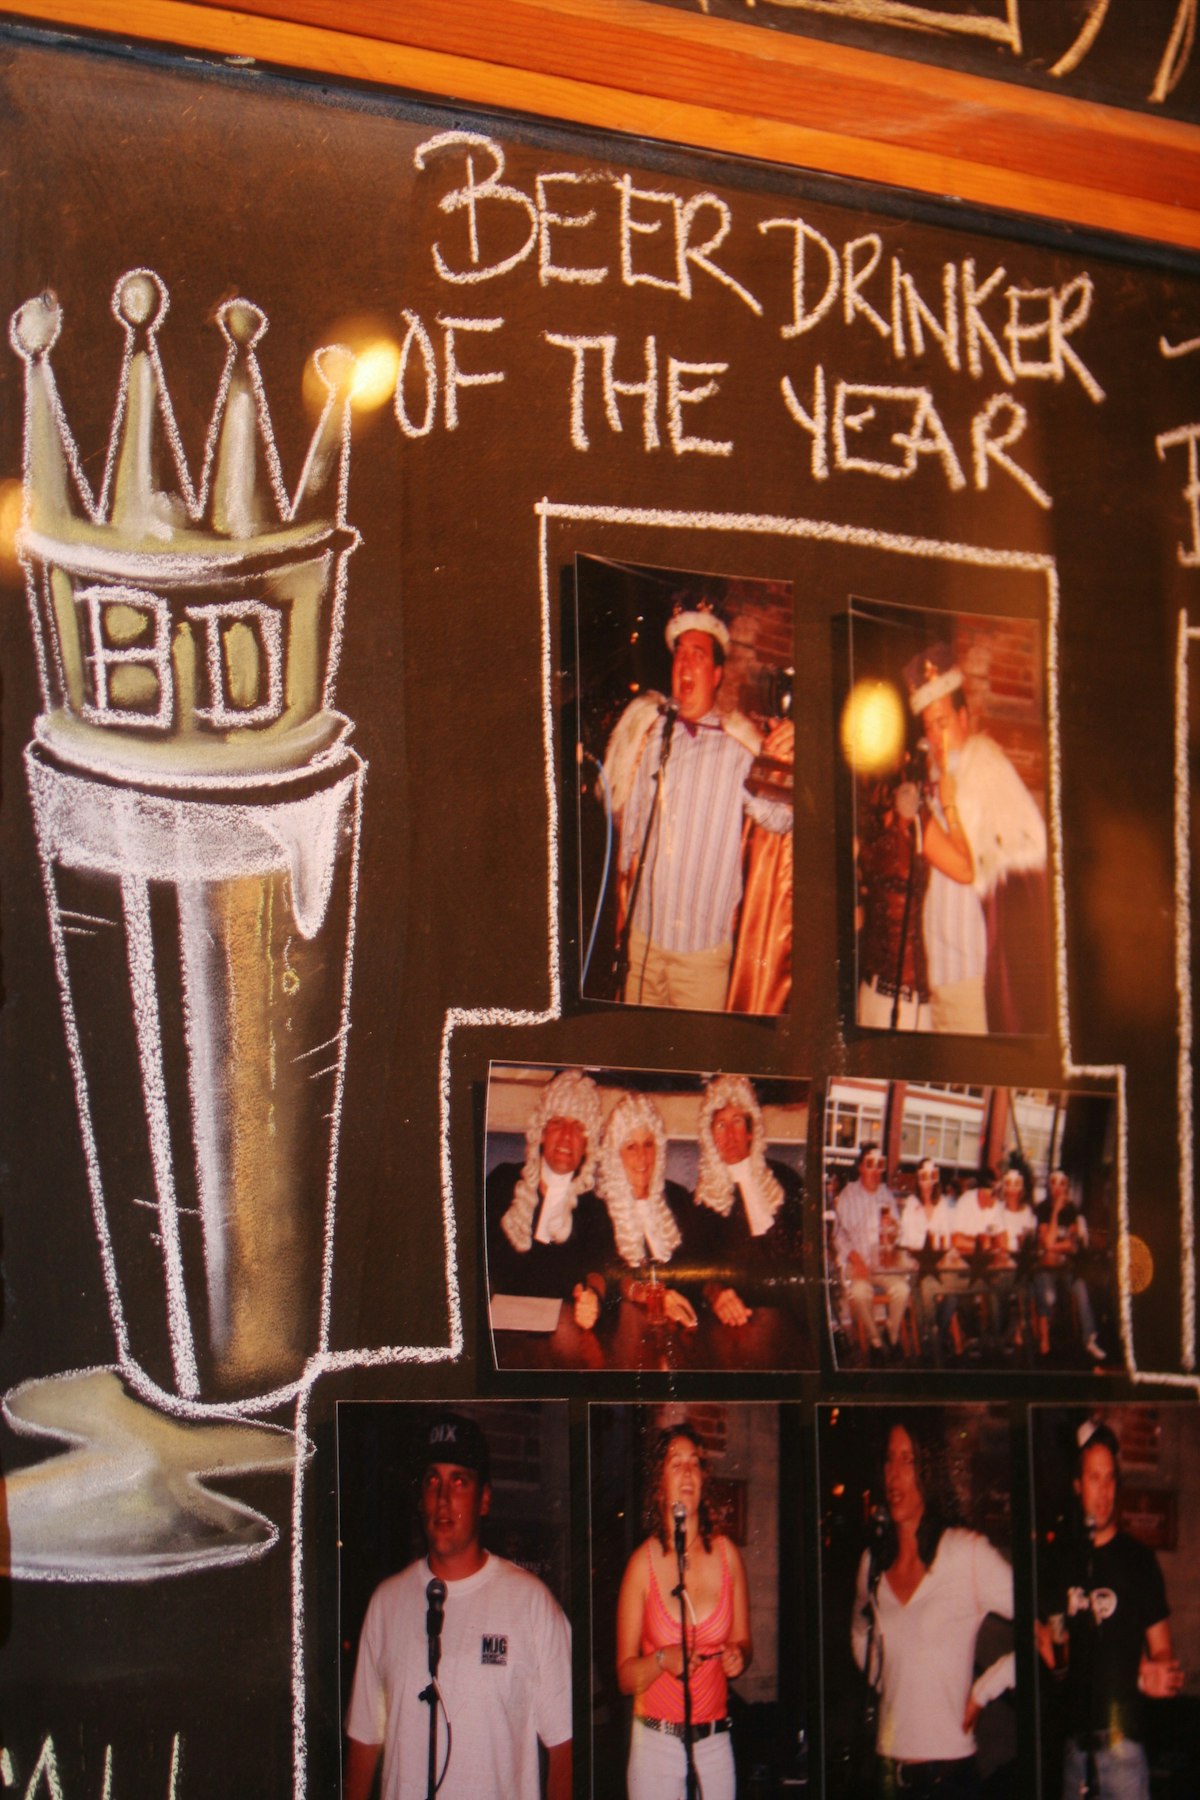 Beer Drinker of the Year Award sign at Yaletown Brewing Company, Yaletown.